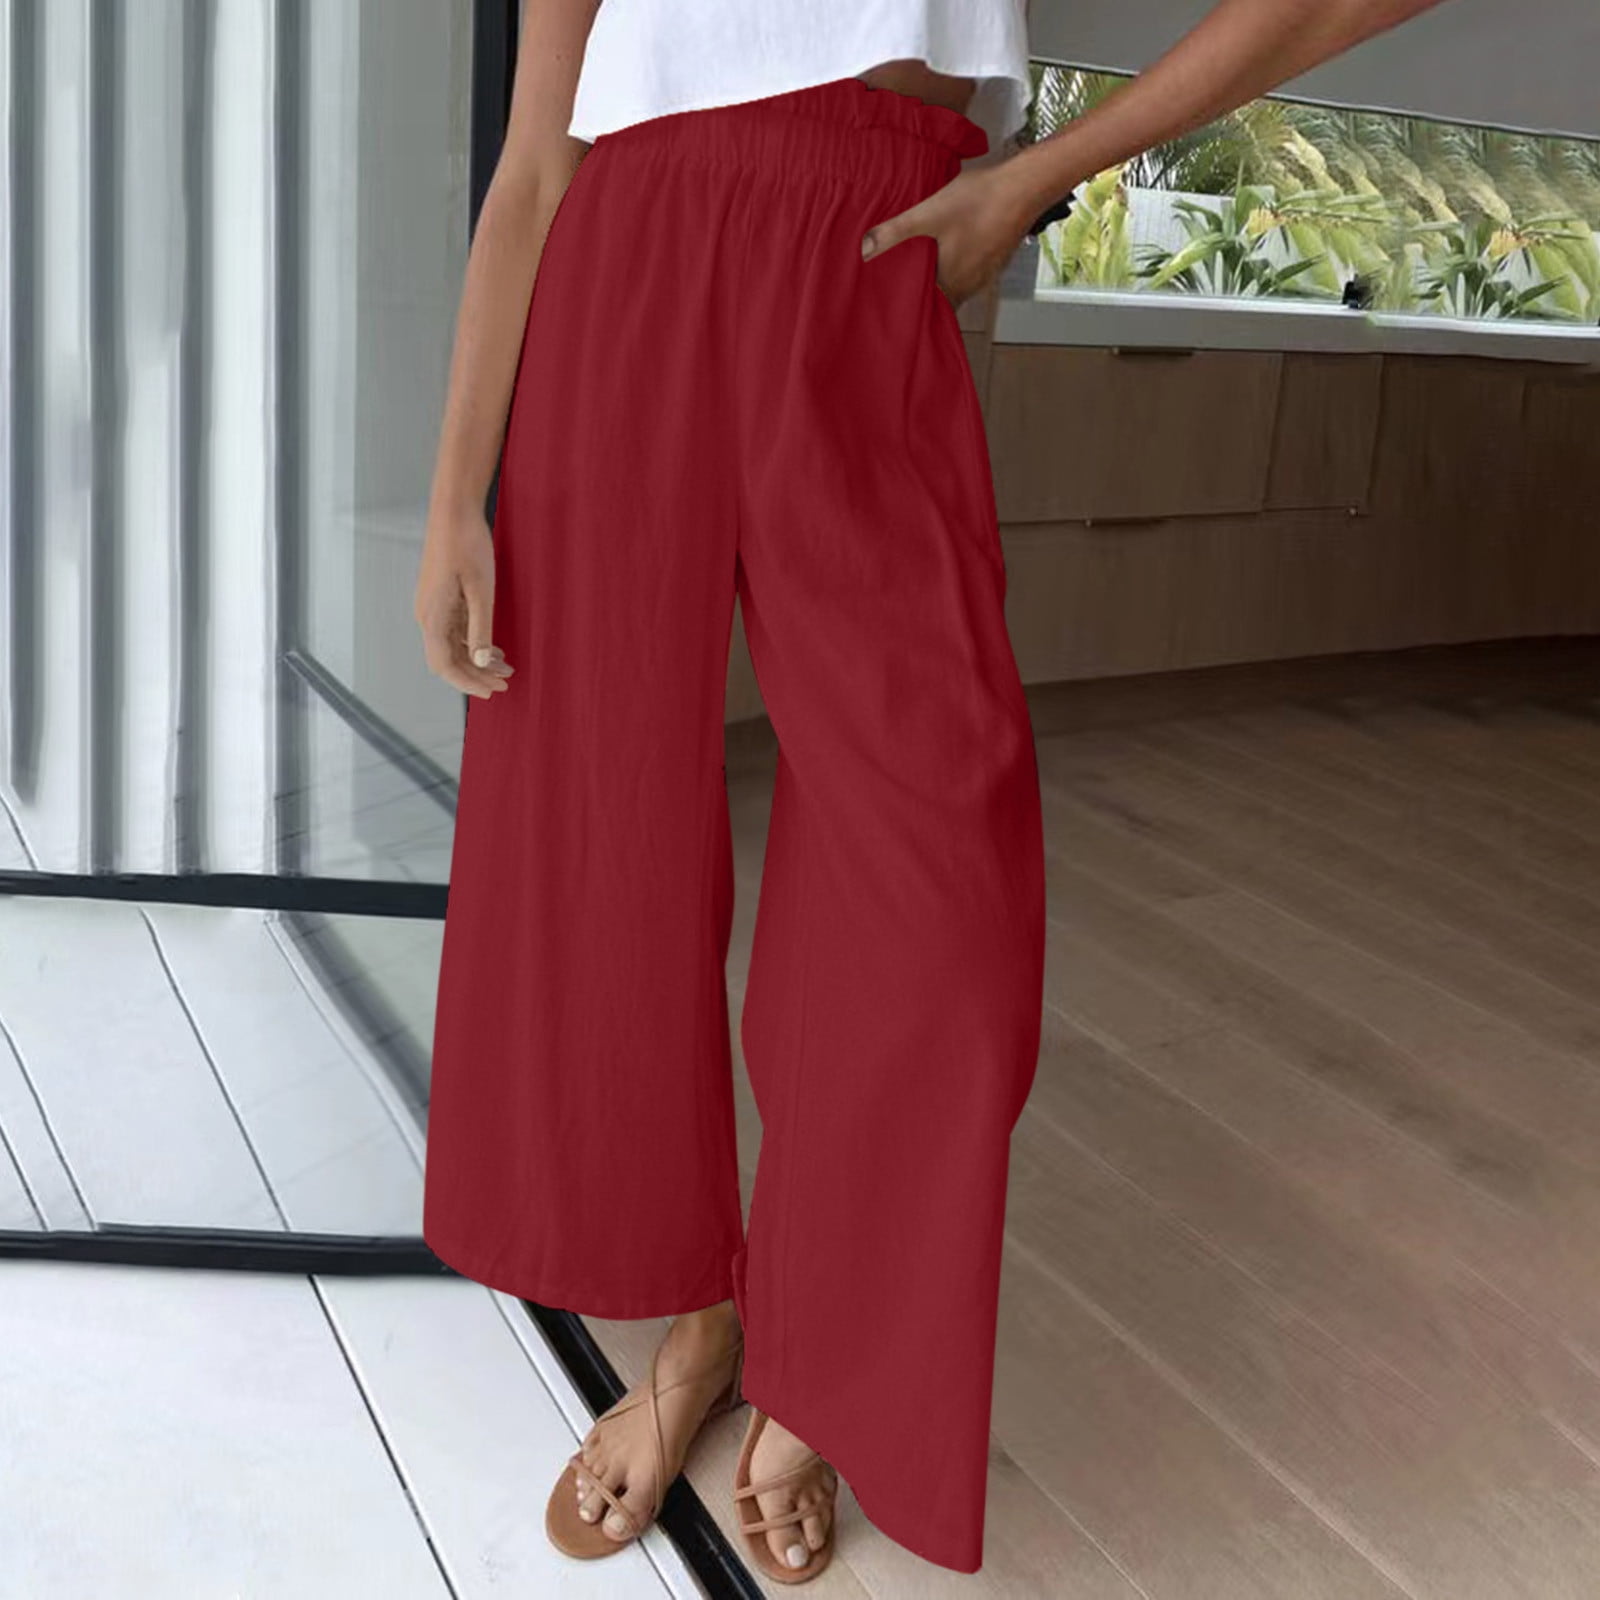 JNGSA Flowy Pants for Women Casual High Waisted Wide Leg Palazzo Pants  Trousers Solid Color Elastic Pants Watermelon Red 4 